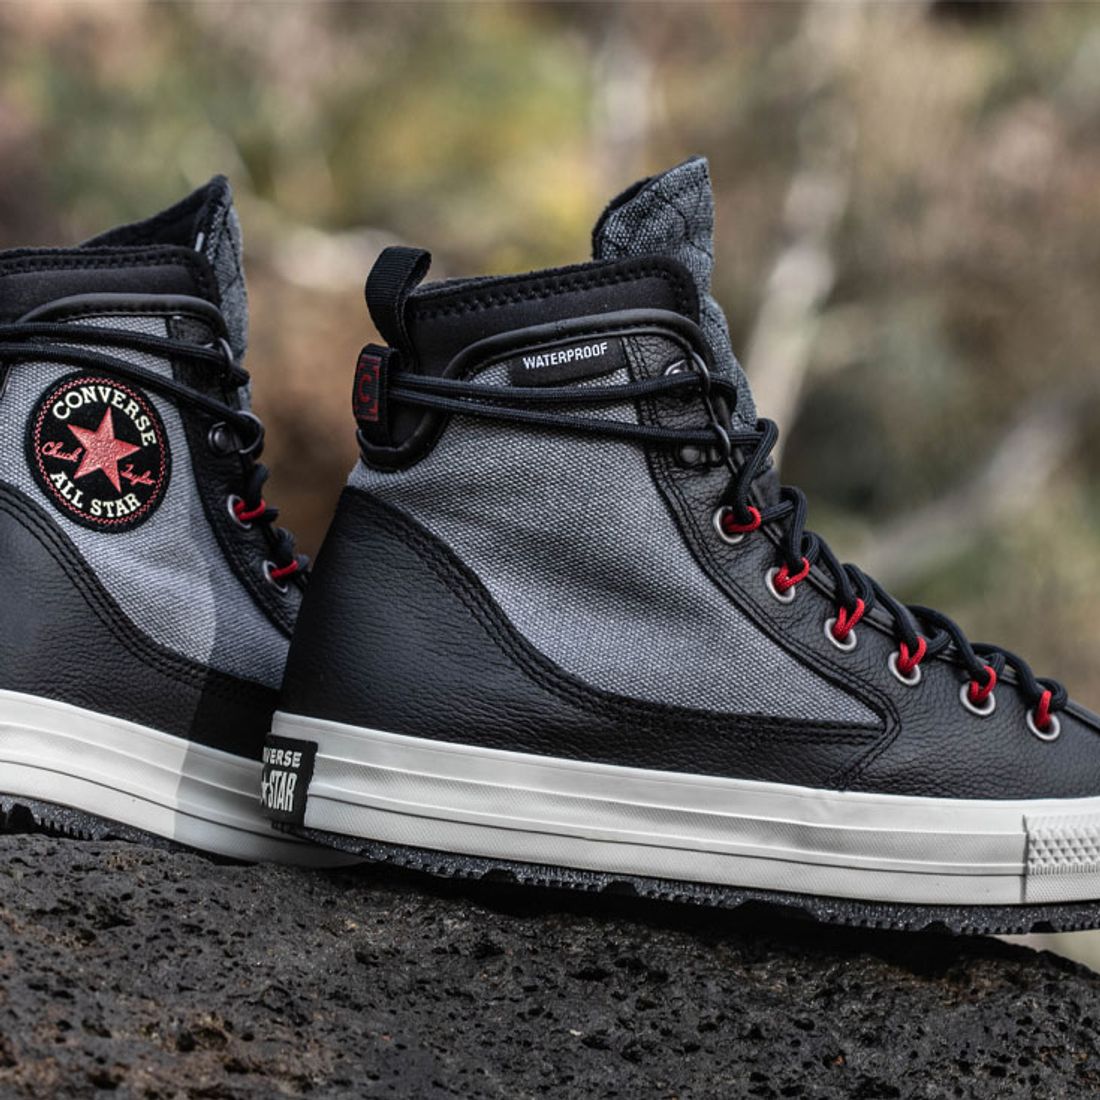 A Brief History Of The Converse Chuck Taylor All Star Sneaker, The Journal